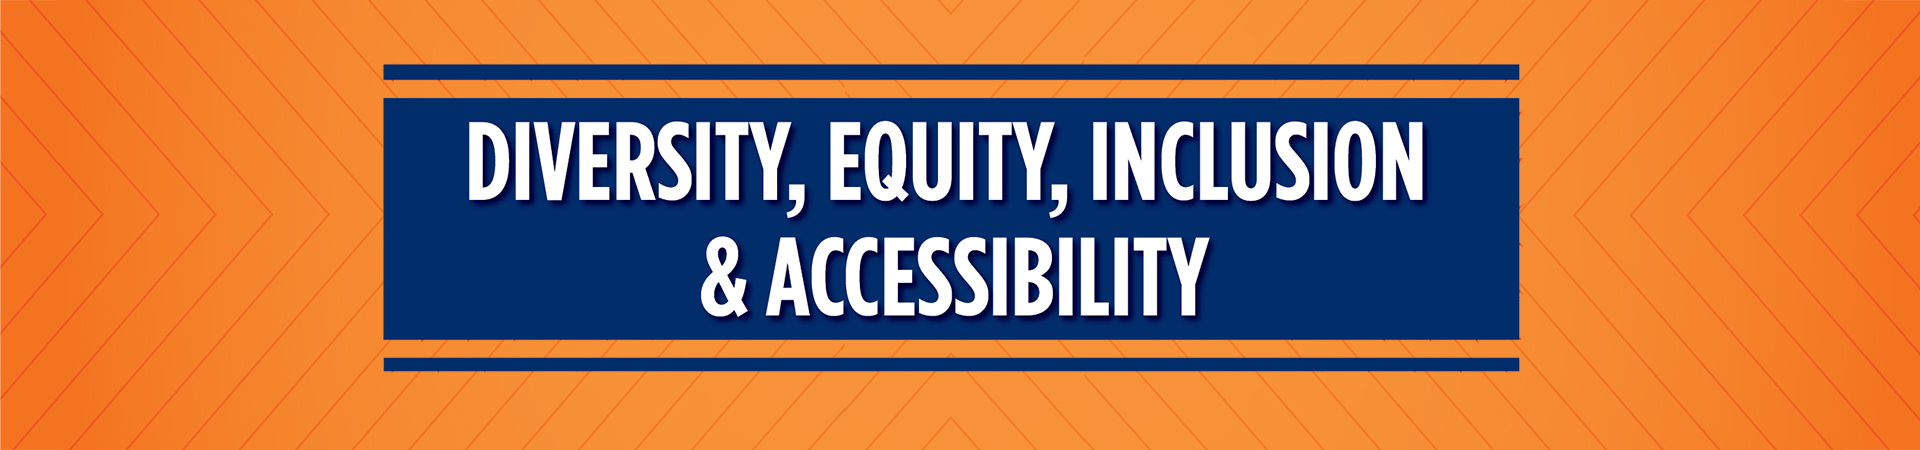 Text: Diversity, Equity, Inclusion & Accessibility